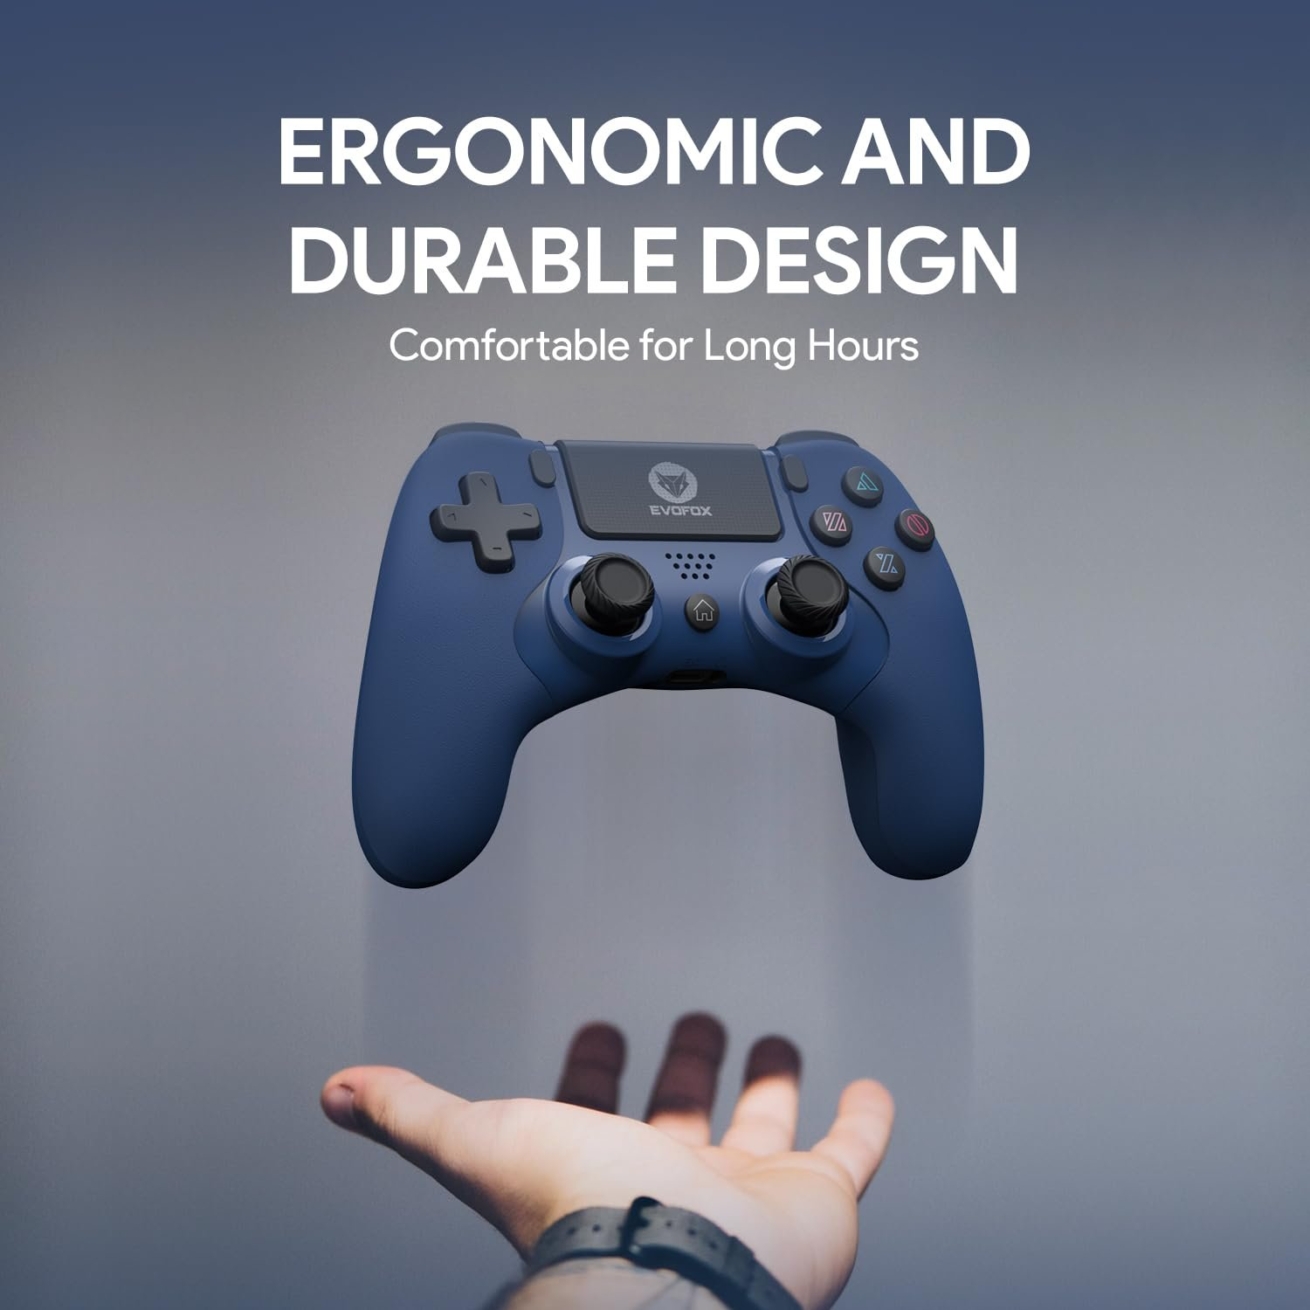 EvoFox Elite Play Wireless Controller for PS4, iPad & iPhones, Bluetooth 5, Dual Vibration, 6 Axis Gyro Sensor, 10 Hours of Game Play, Touch Panel, Built in Speaker